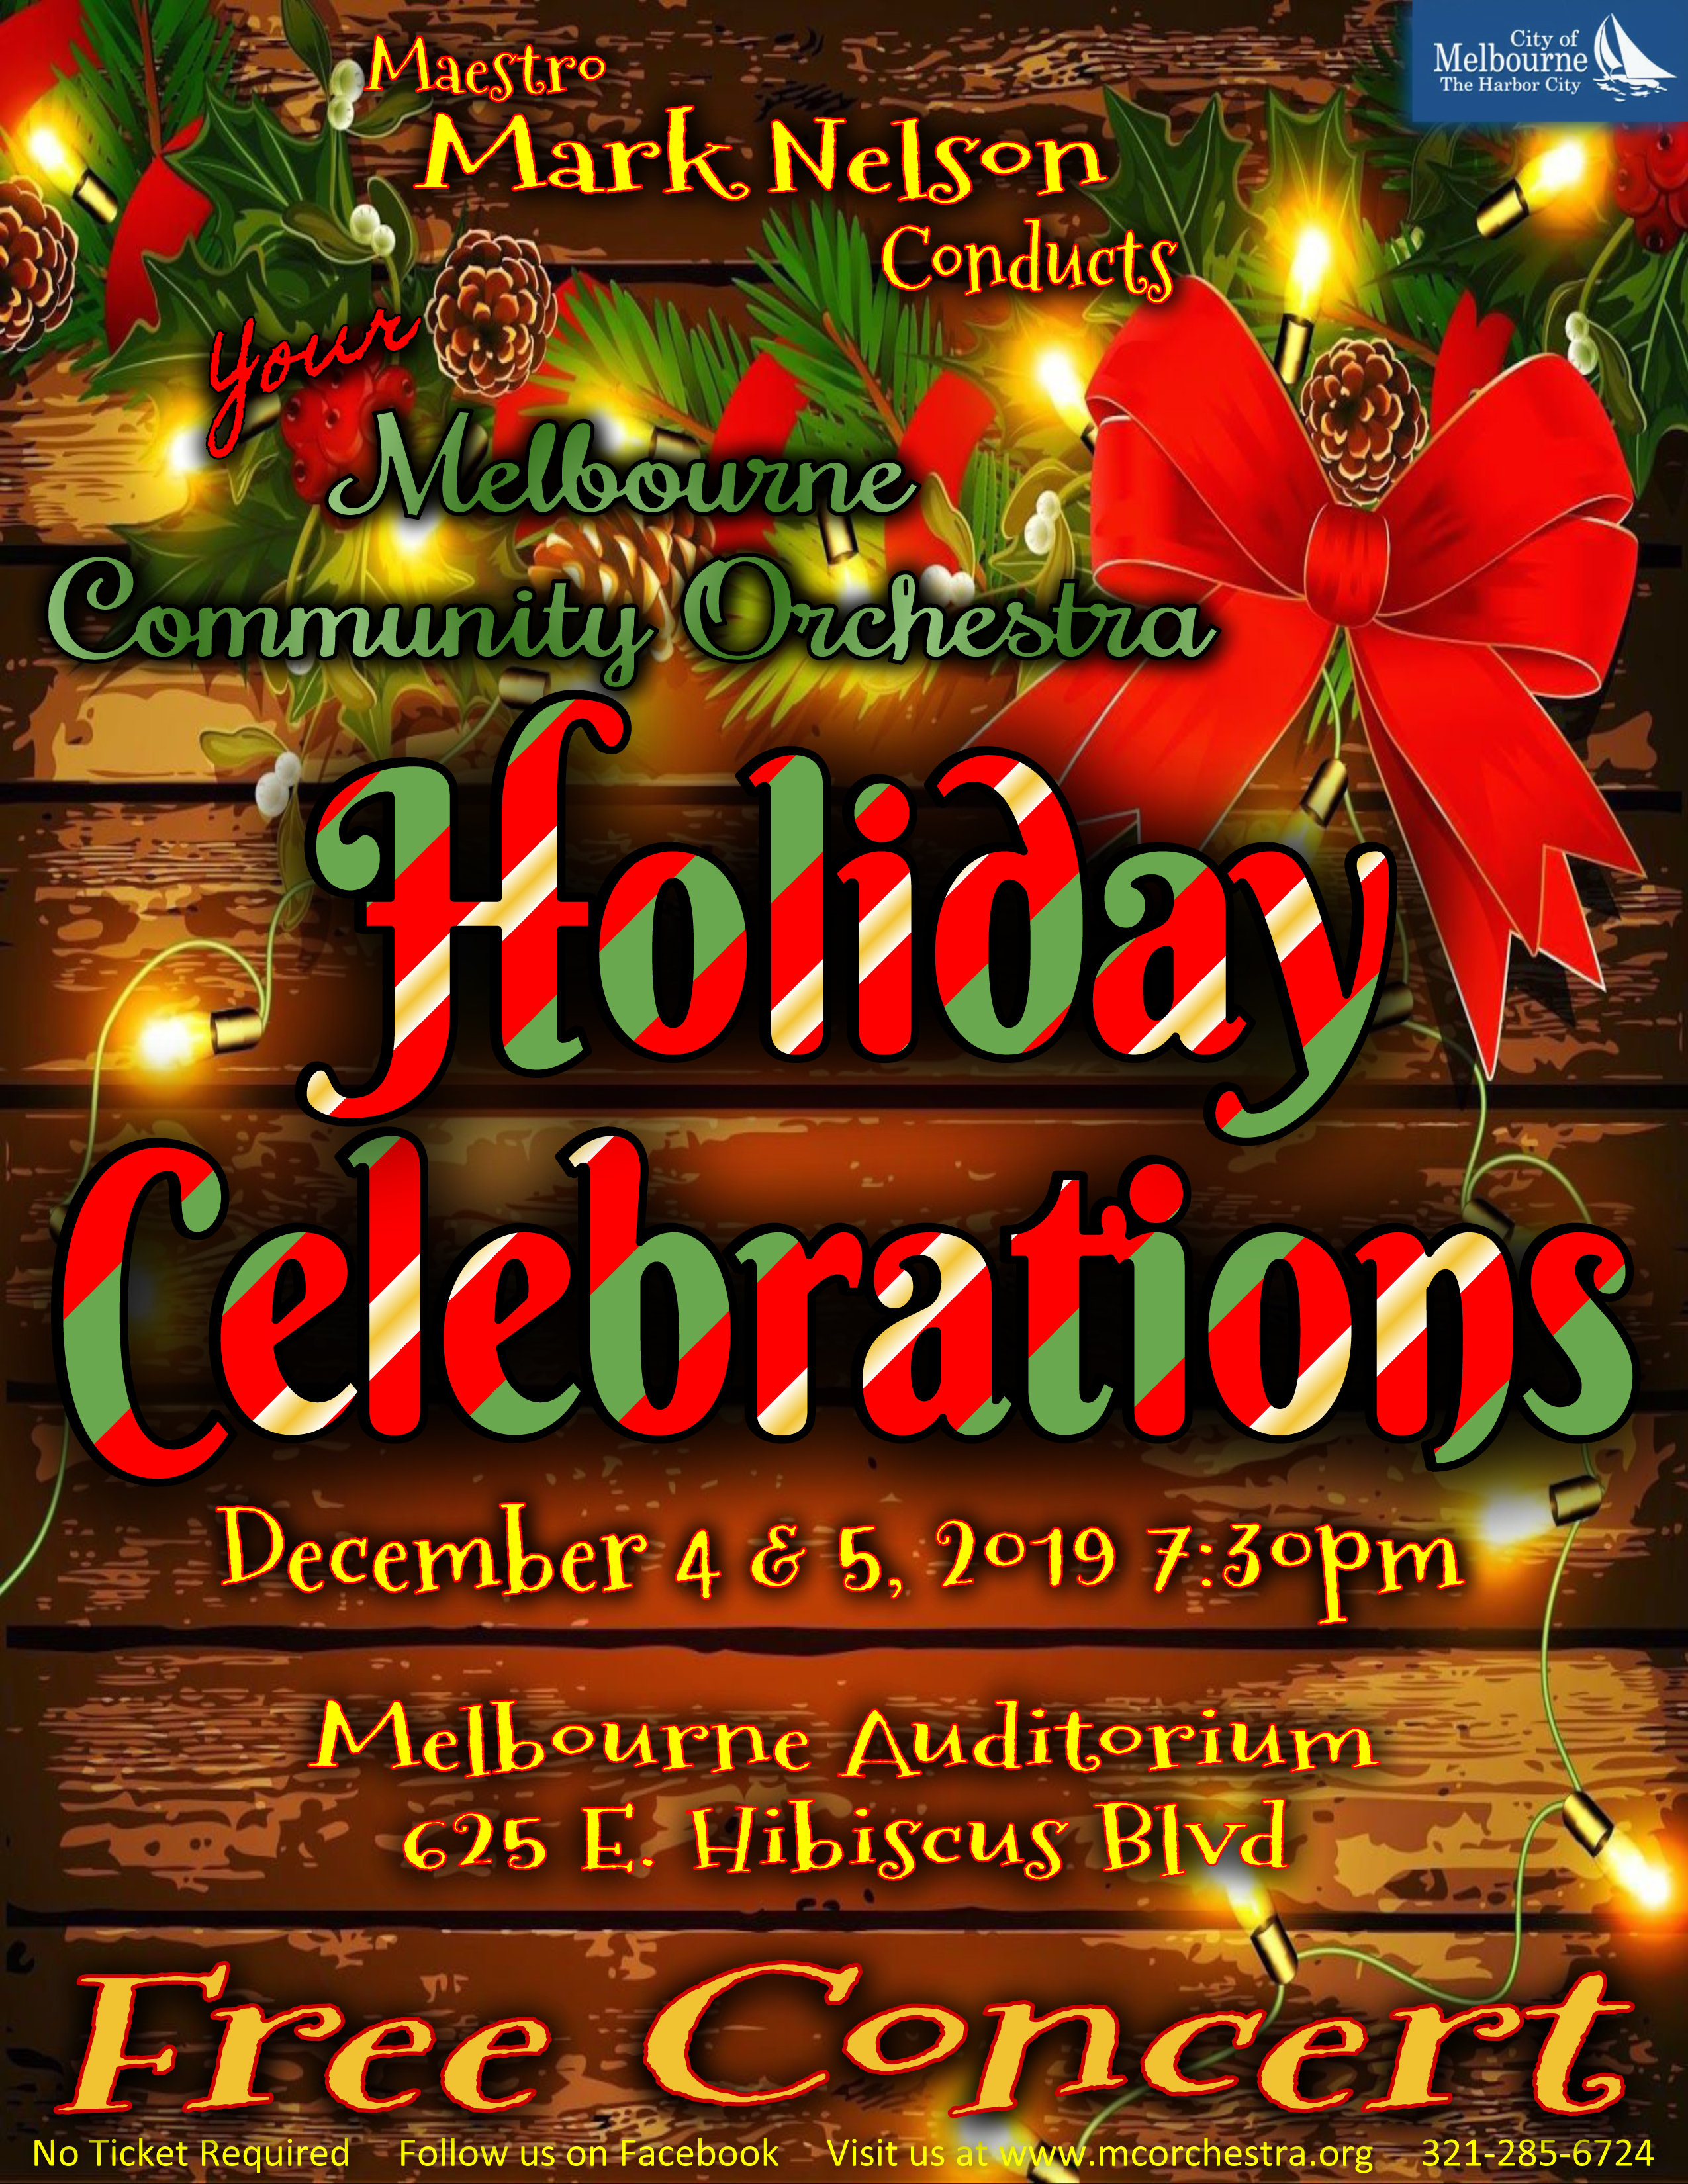 'Holiday Celebrations' presented by the Melbourne Community Orchestra